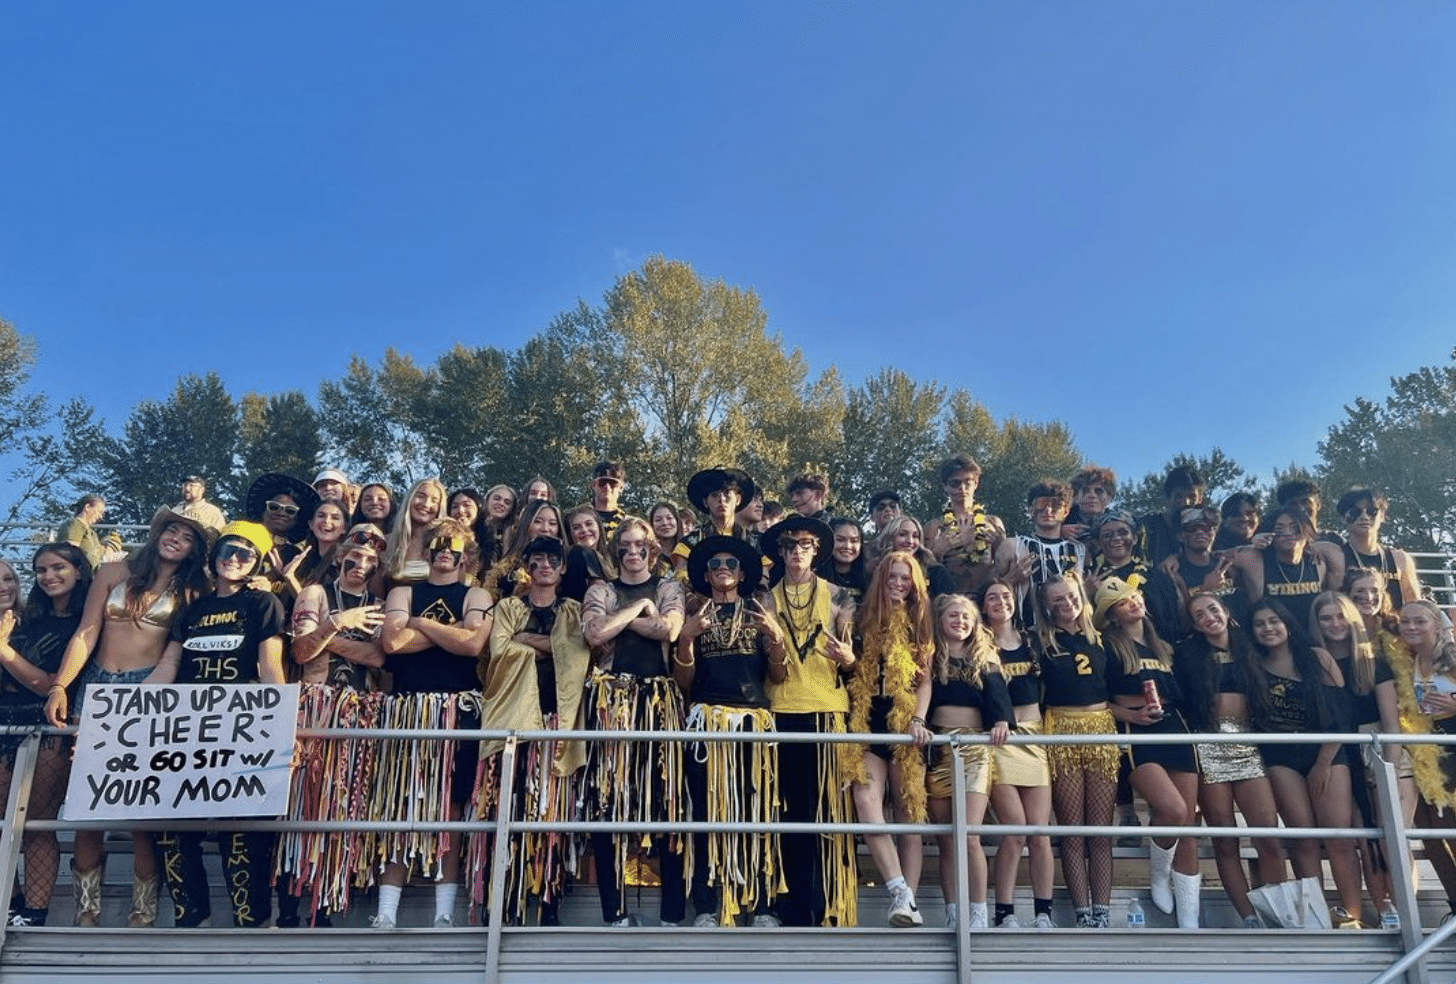 Inglemoor High School student section, wearing gold and black gear, standing together in the bleachers, showing their school pride and unity.